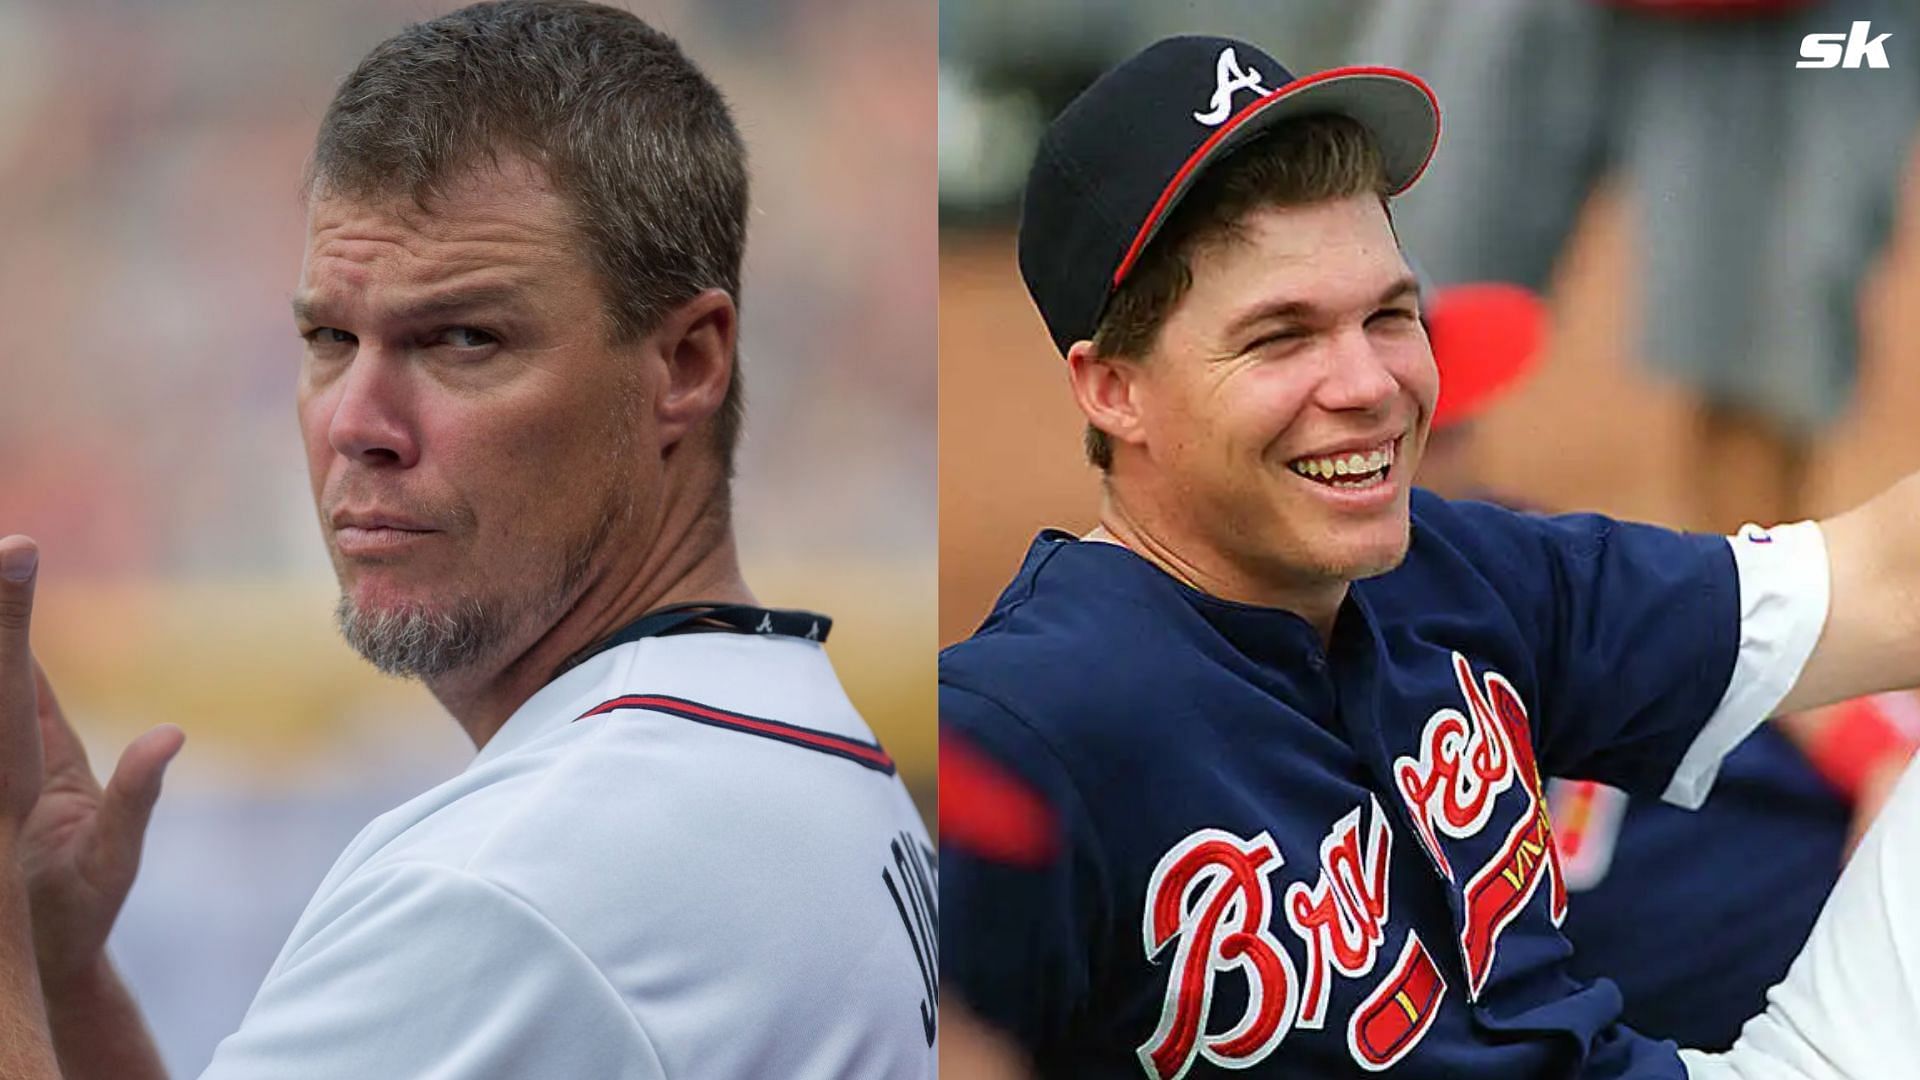 When Atlanta Braves legend Chipper Jones shared life advice in an inspiring  letter to his younger self